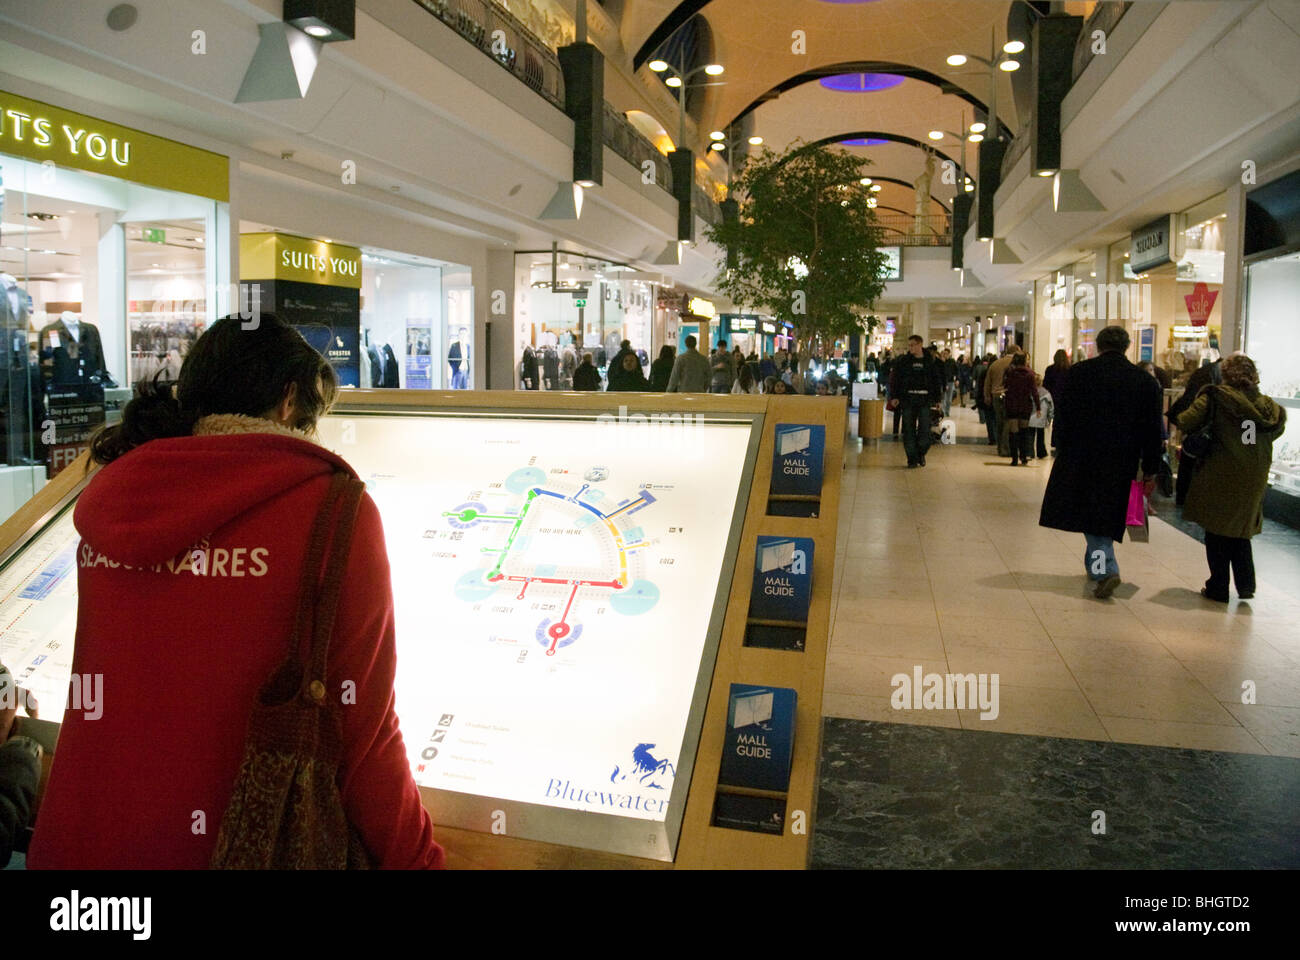 Shoppers looking at the map of the mall, Bluewater Shopping centre, Kent, UK Stock Photo